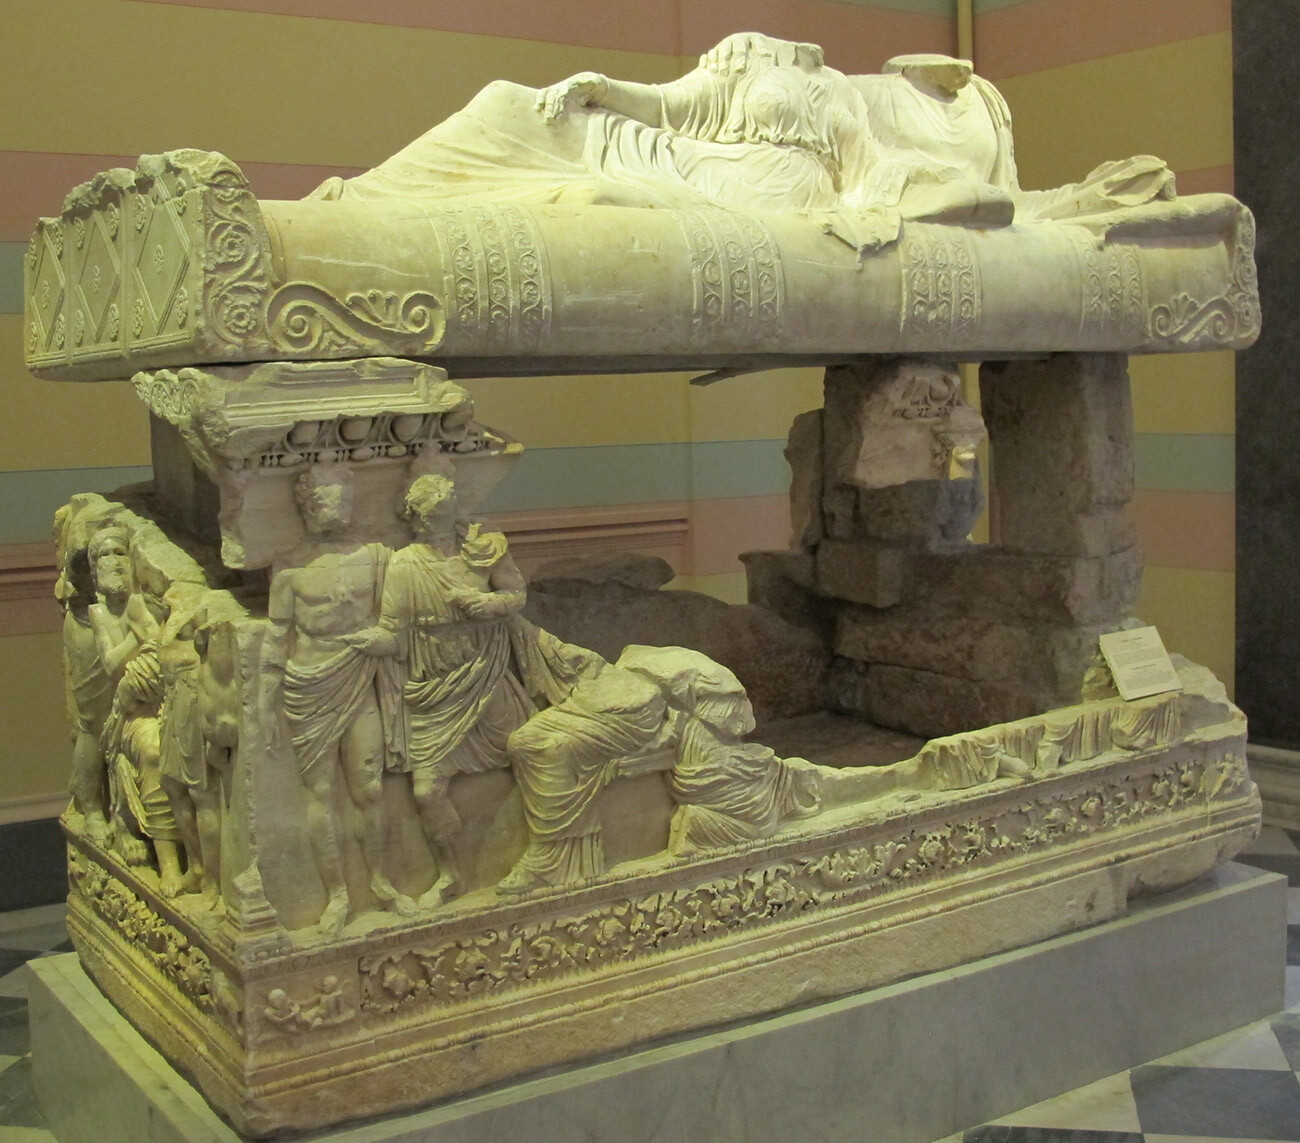 A sarcophagus from Myrmekion in the Hermitage collection